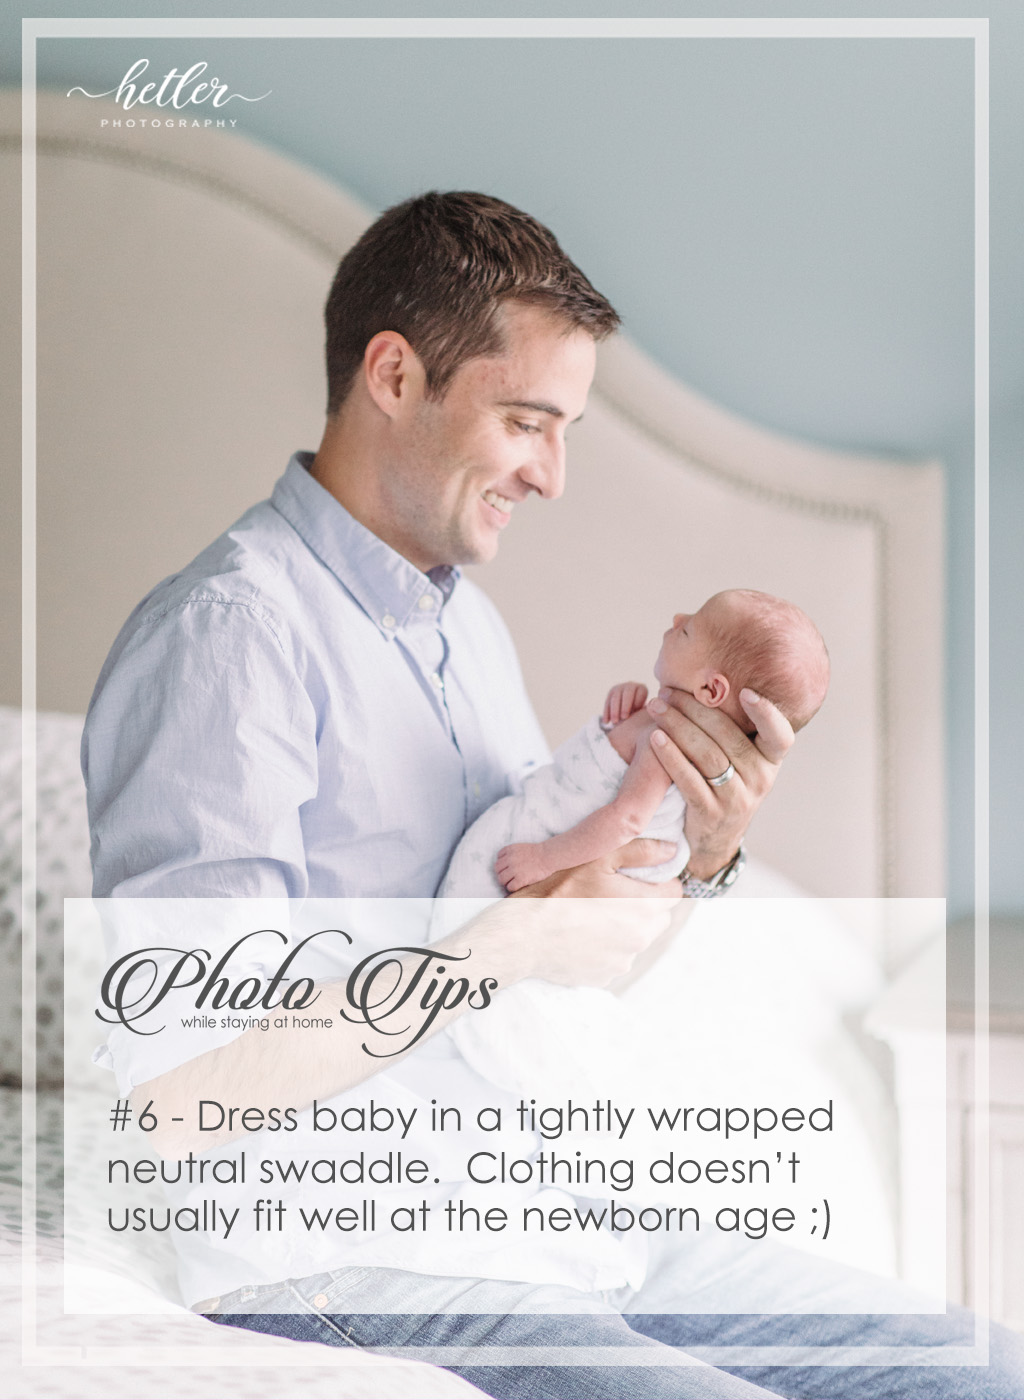 DIY newborn photography tips to use at home during the coronavirus pandemic from a Grand Rapids, Michigan photographer